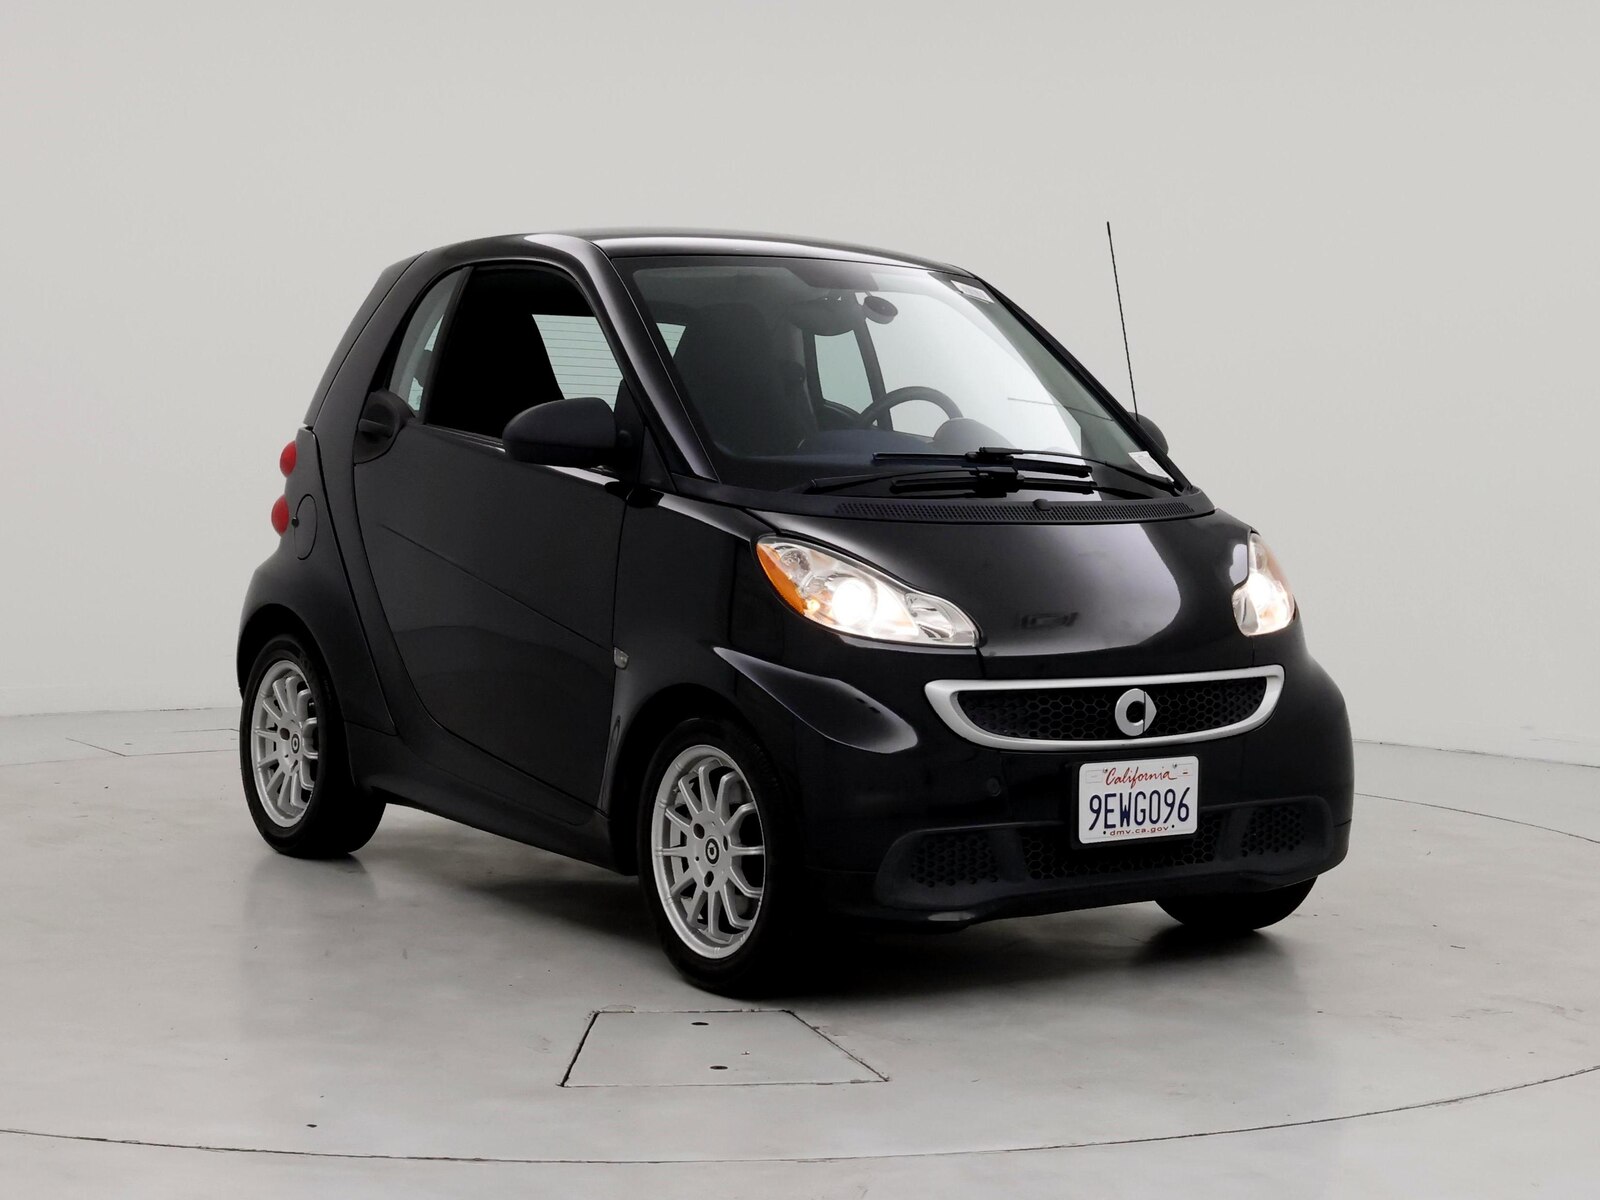 Used 2013 smart fortwo pure with VIN WMEEJ3BA1DK670341 for sale in Spokane Valley, WA